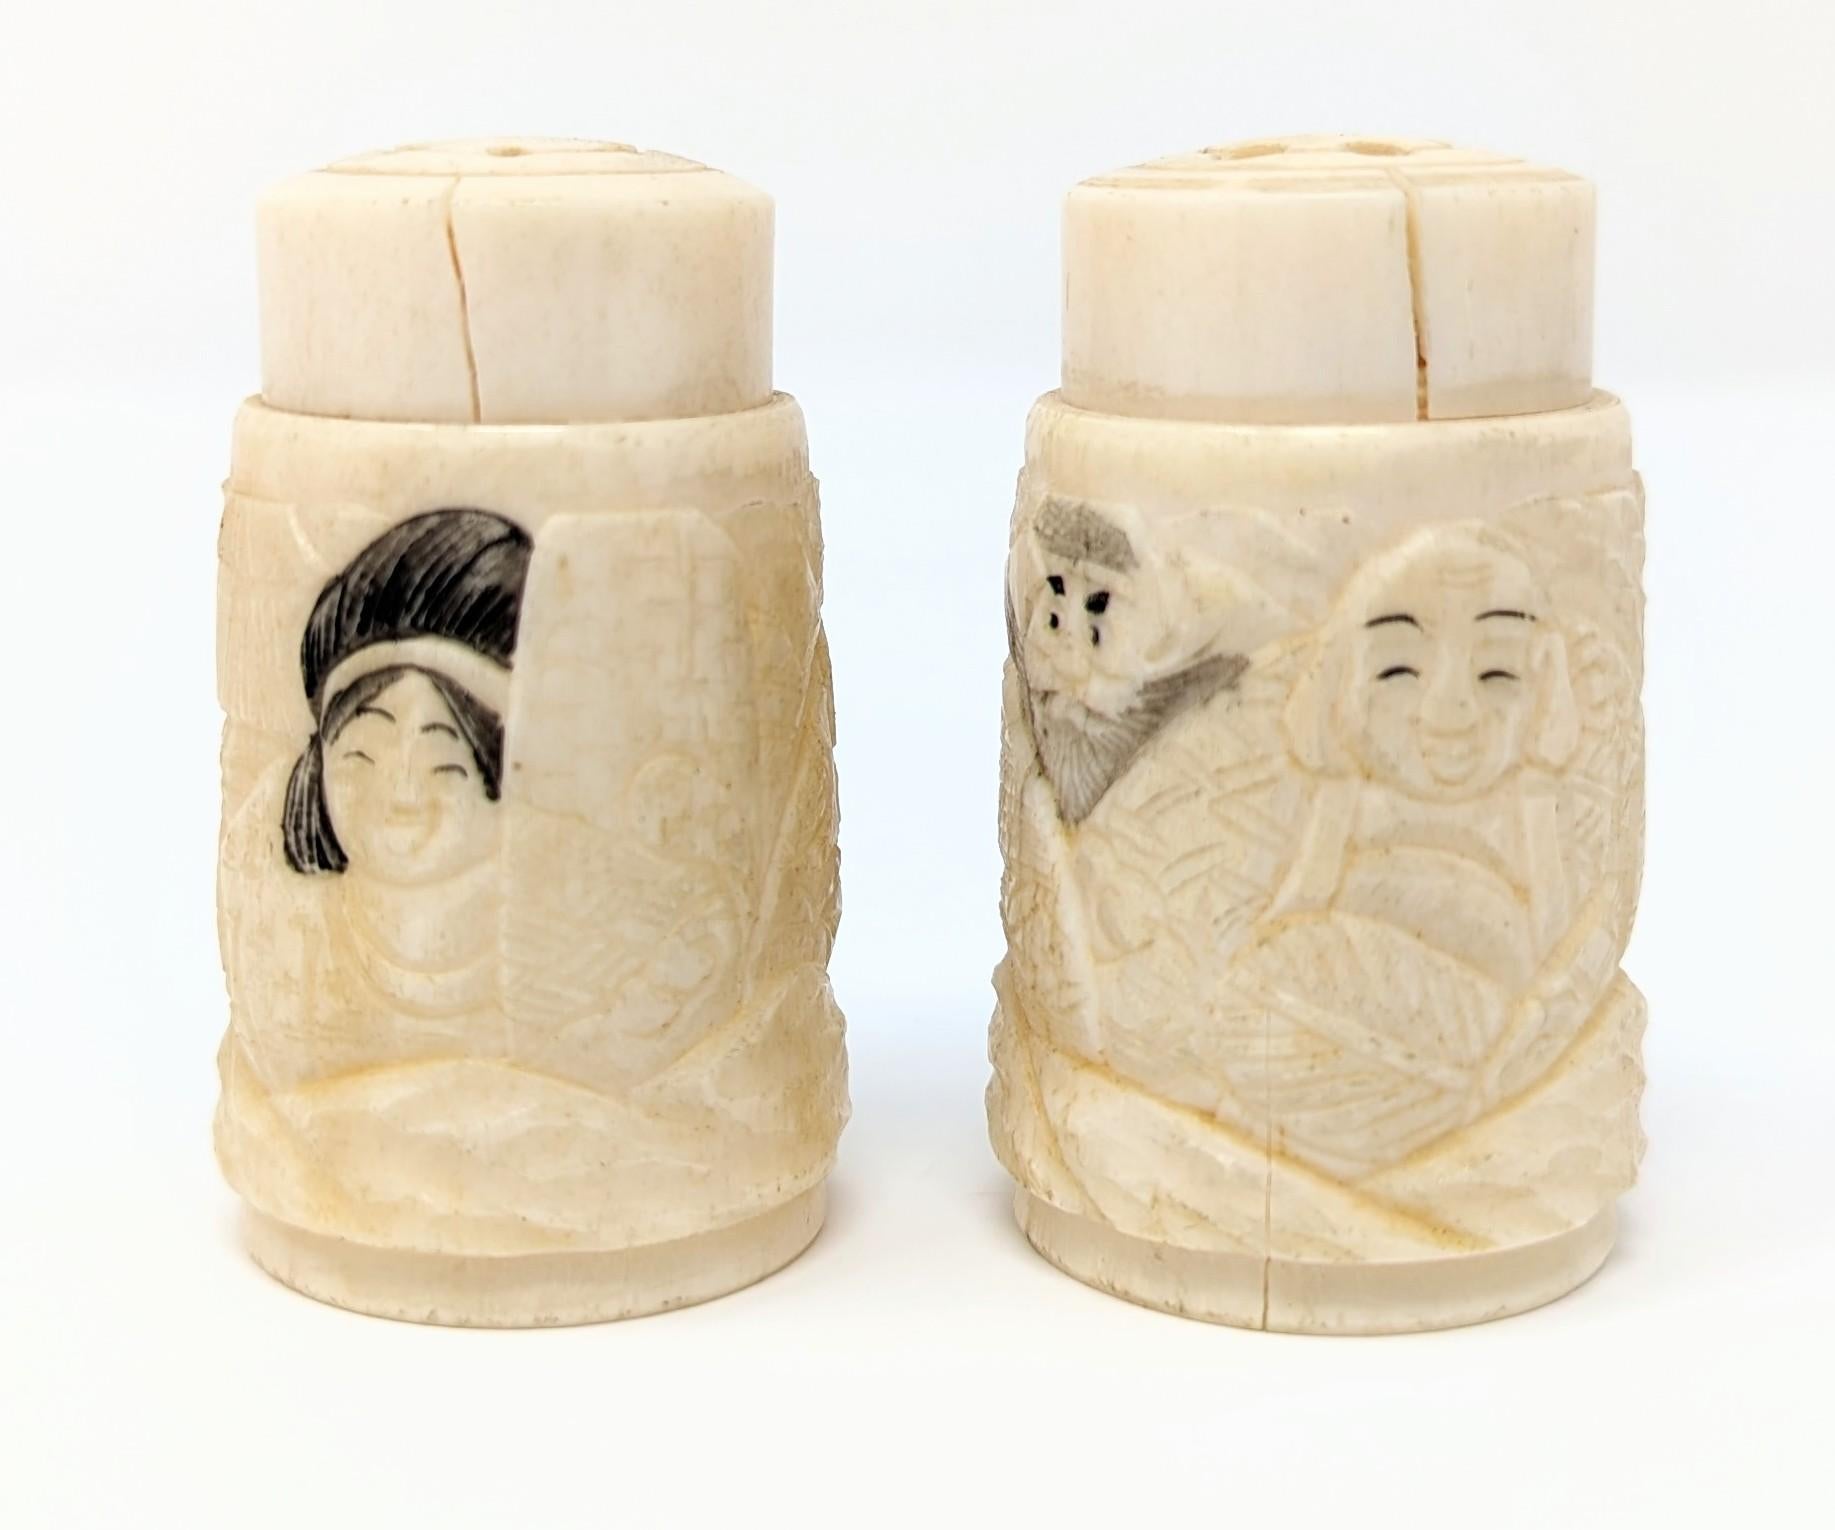 Unique Antique Asian Hand Carved Bone Salt and Pepper Shakers Set  In Fair Condition For Sale In Greer, SC